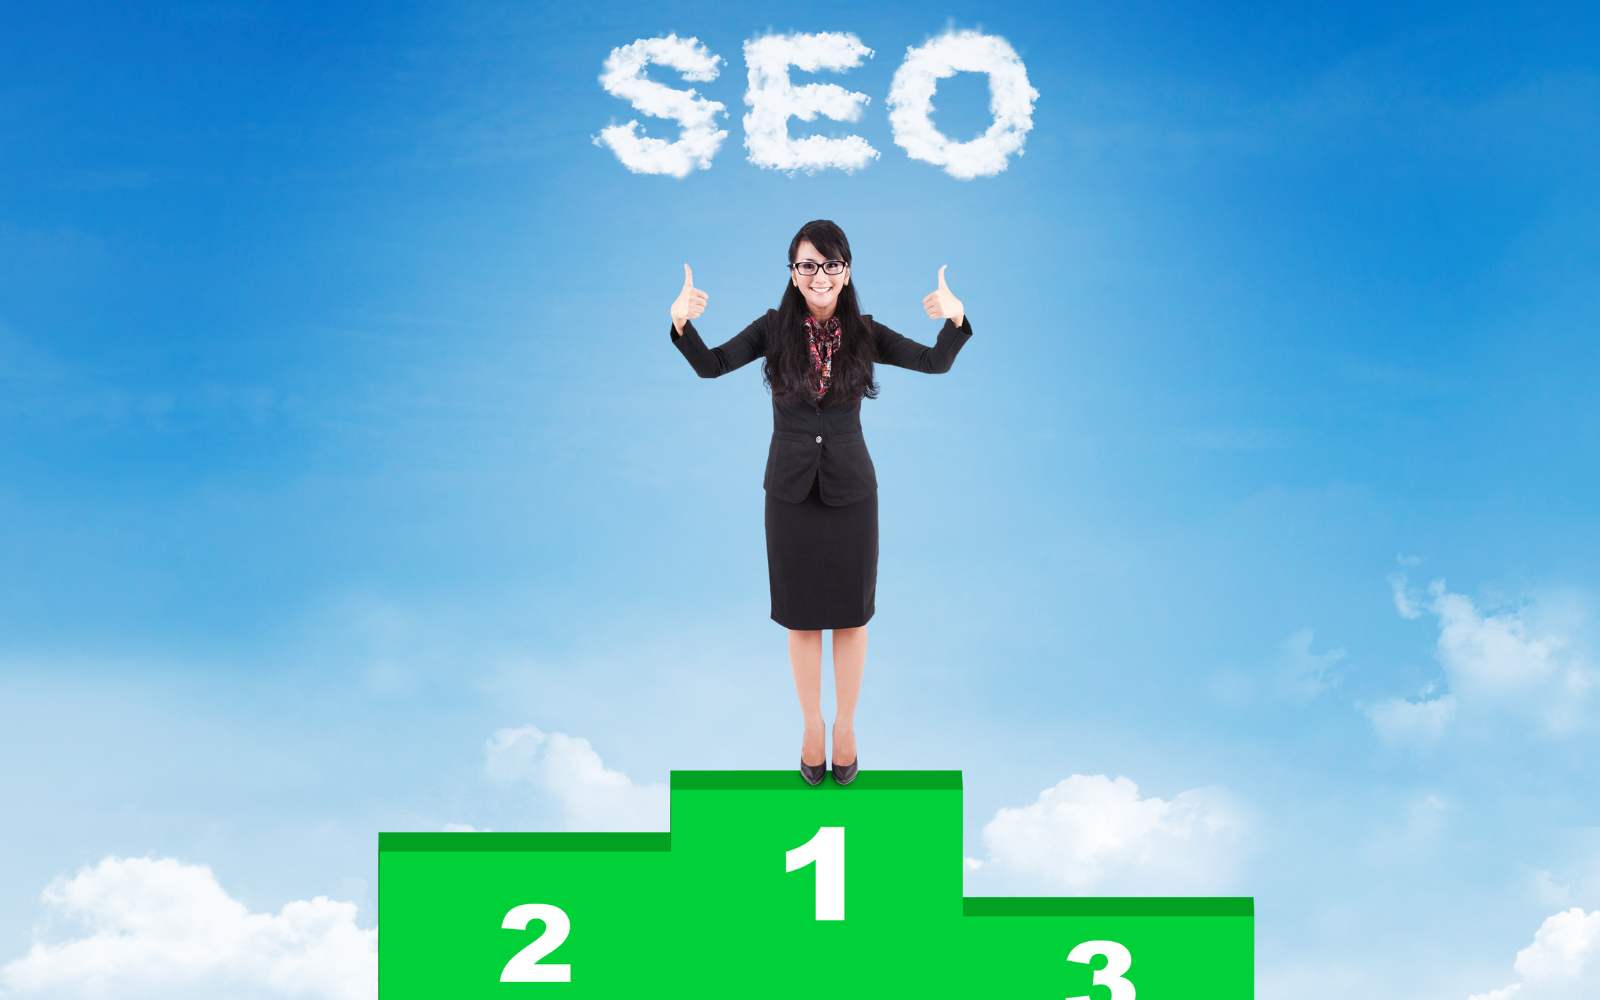 How to Promote SEO For Company Growth